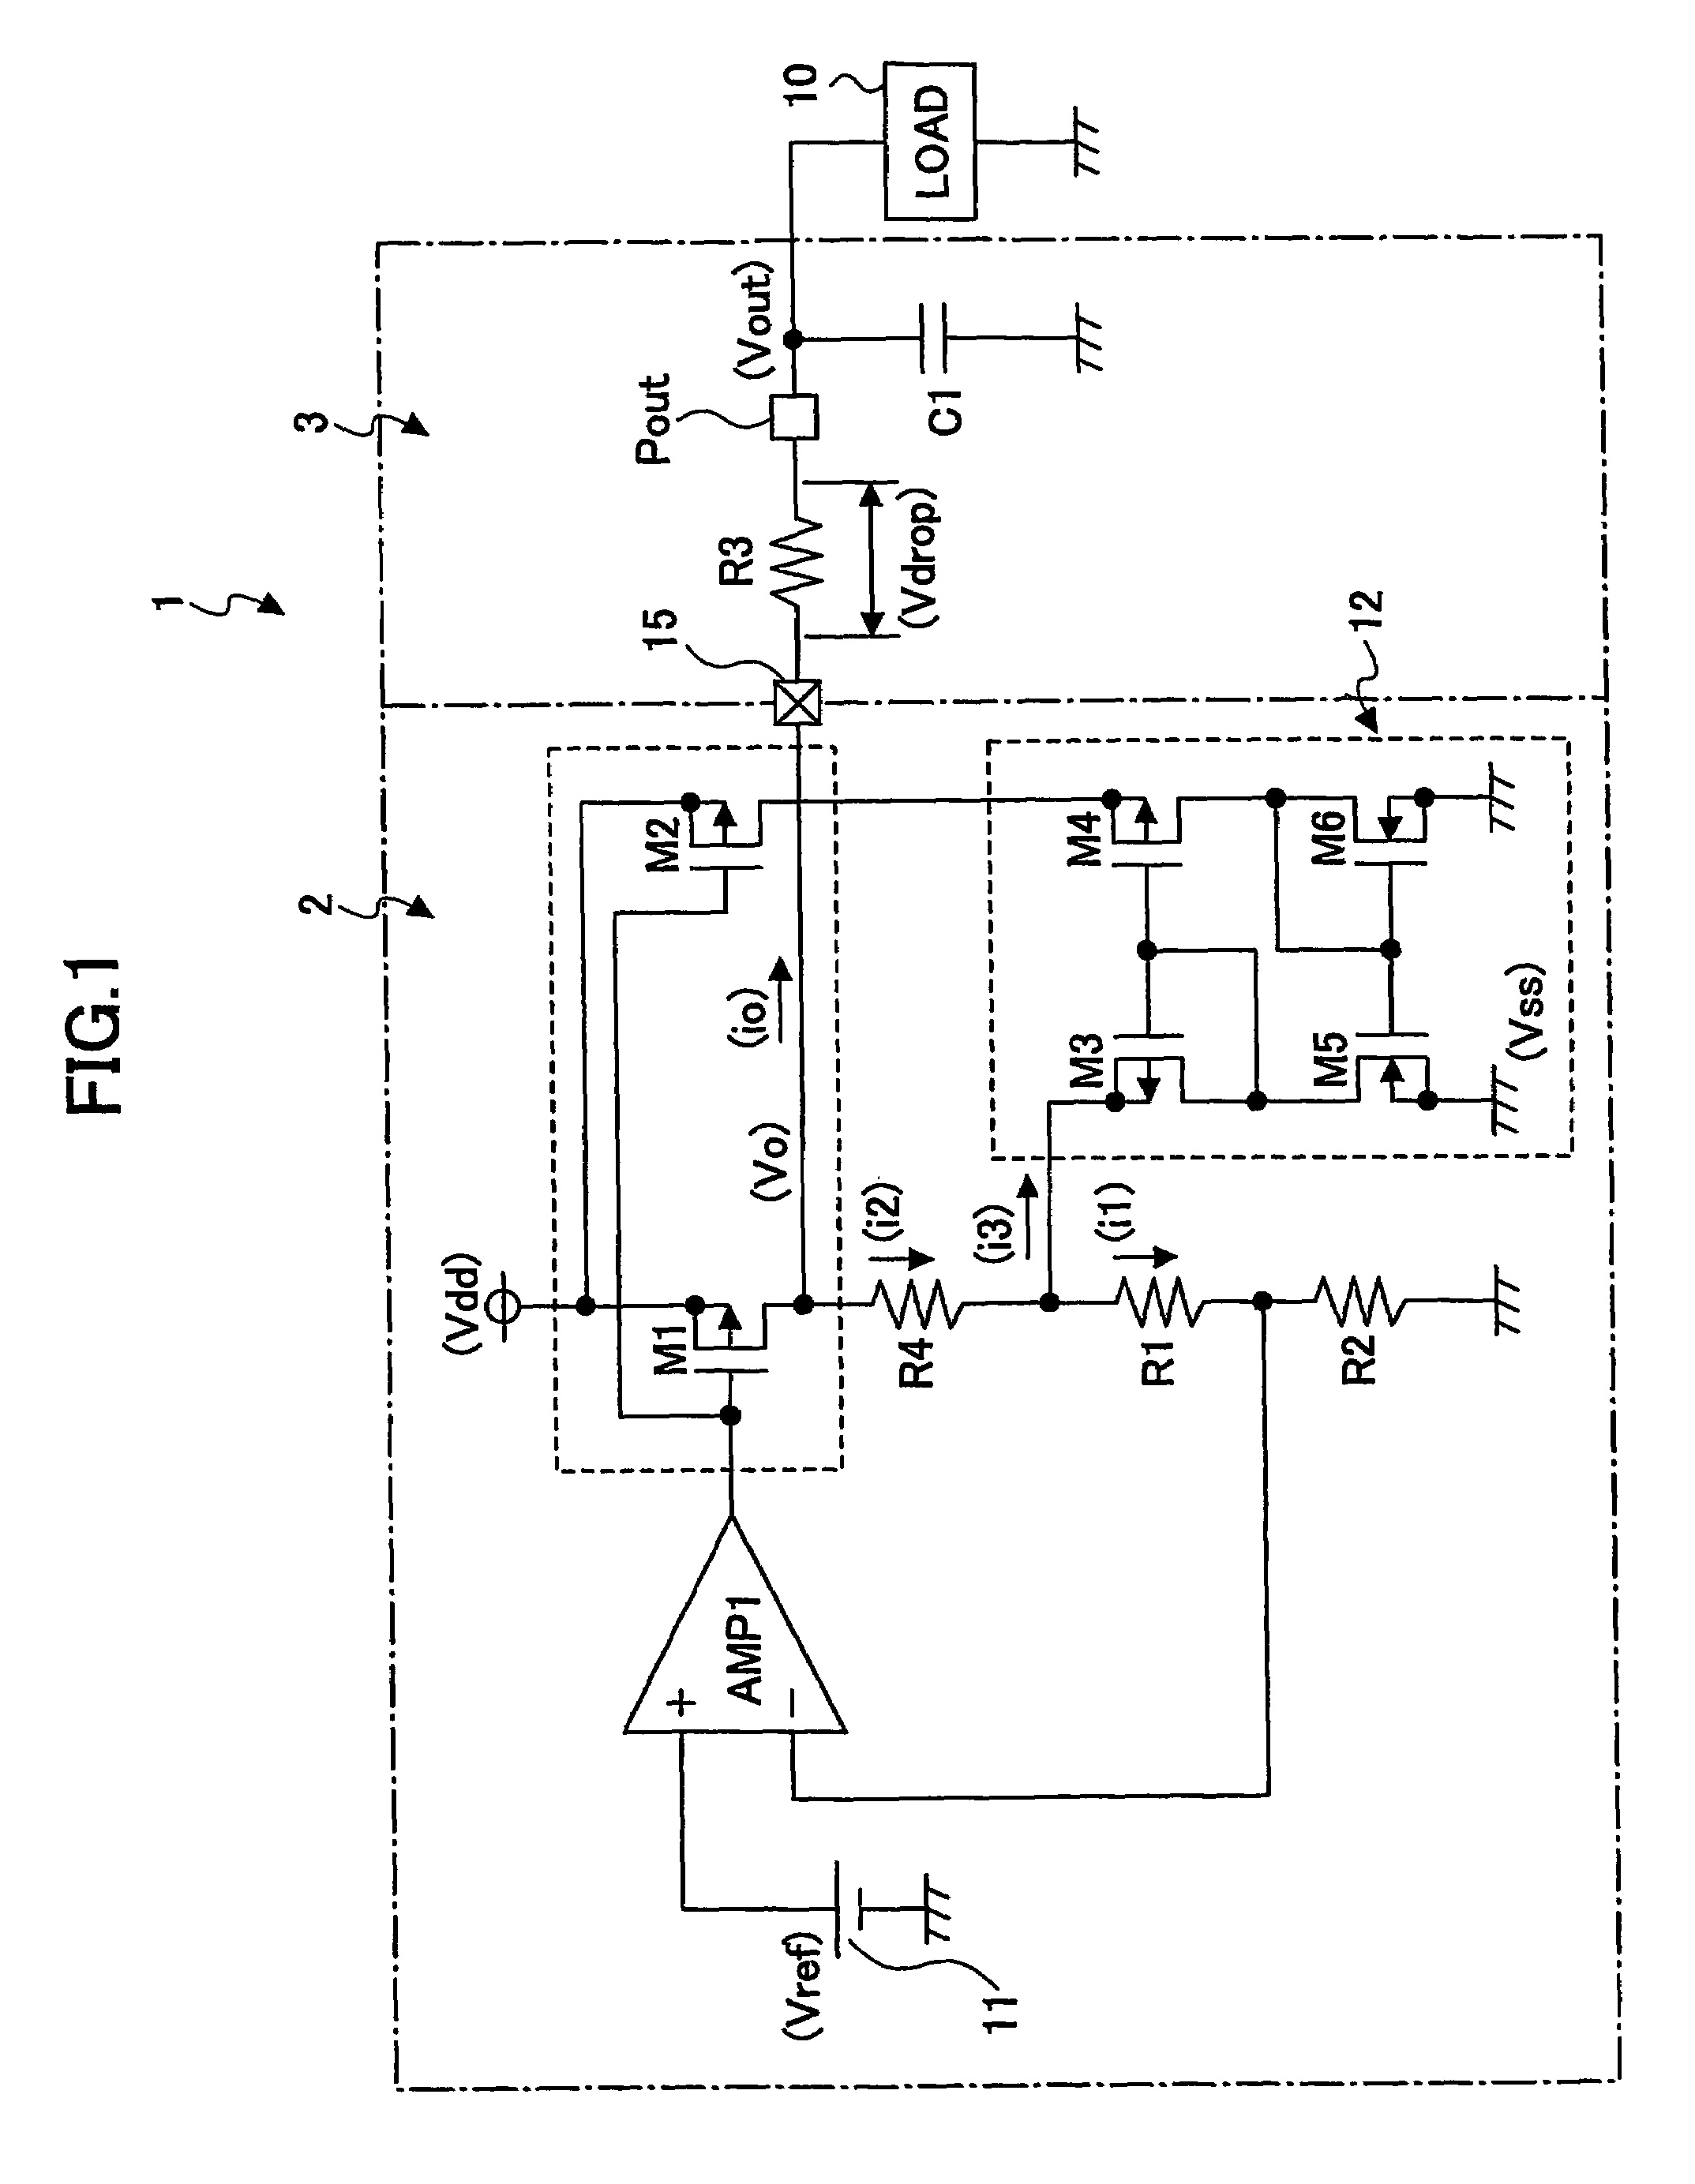 Constant voltage circuit with phase compensation